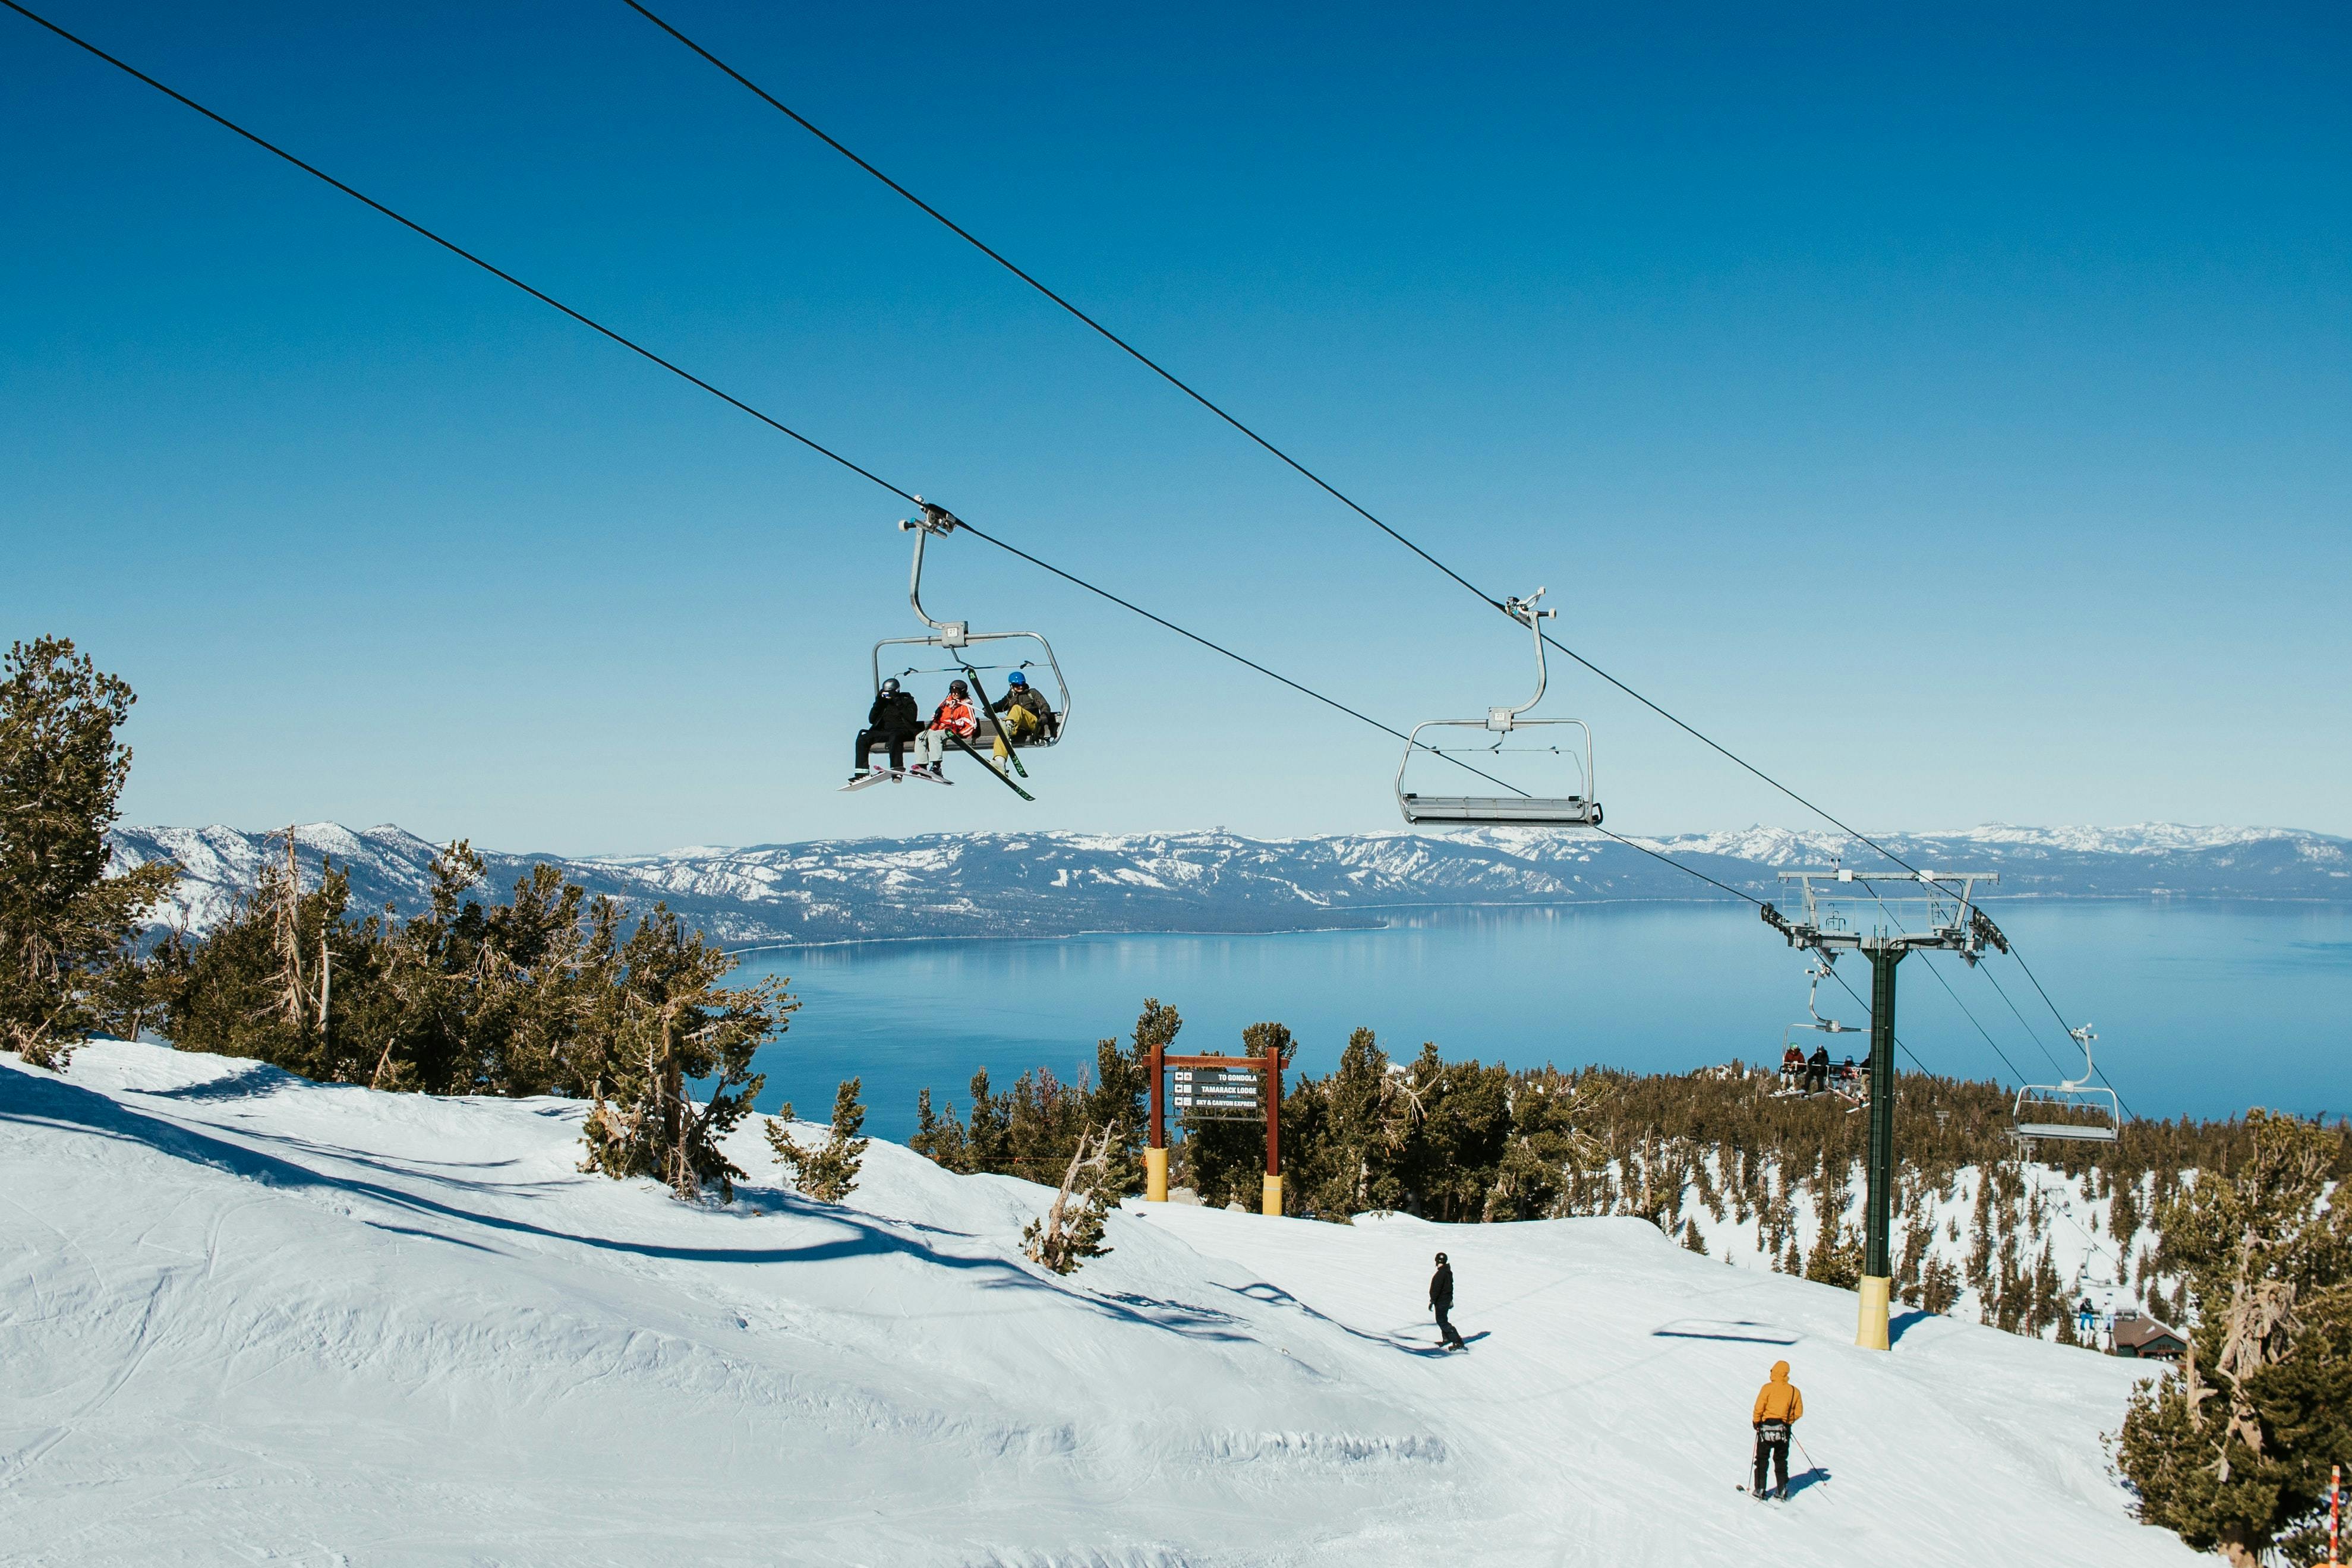 View of a ski chairlift and ski run both with skiers on them. There is a a lake in the background. 